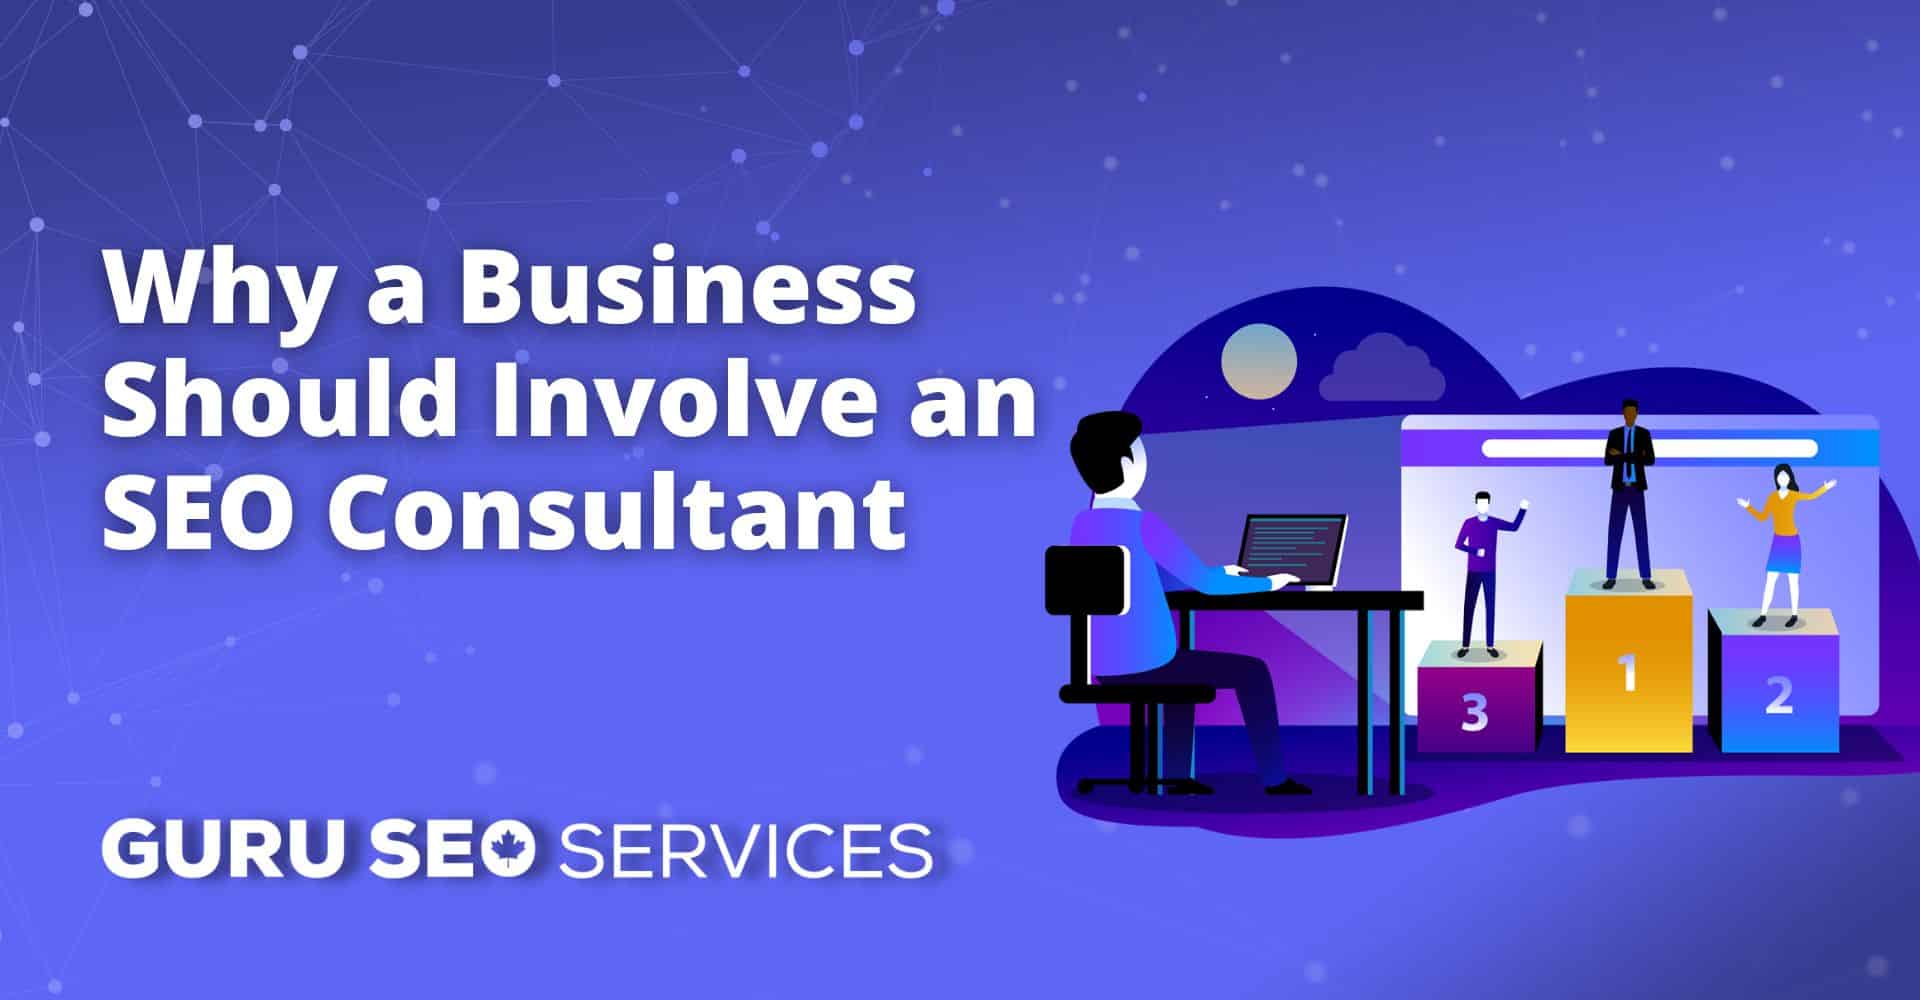 Why should a business consider involving an SEO consultant for their web design needs?